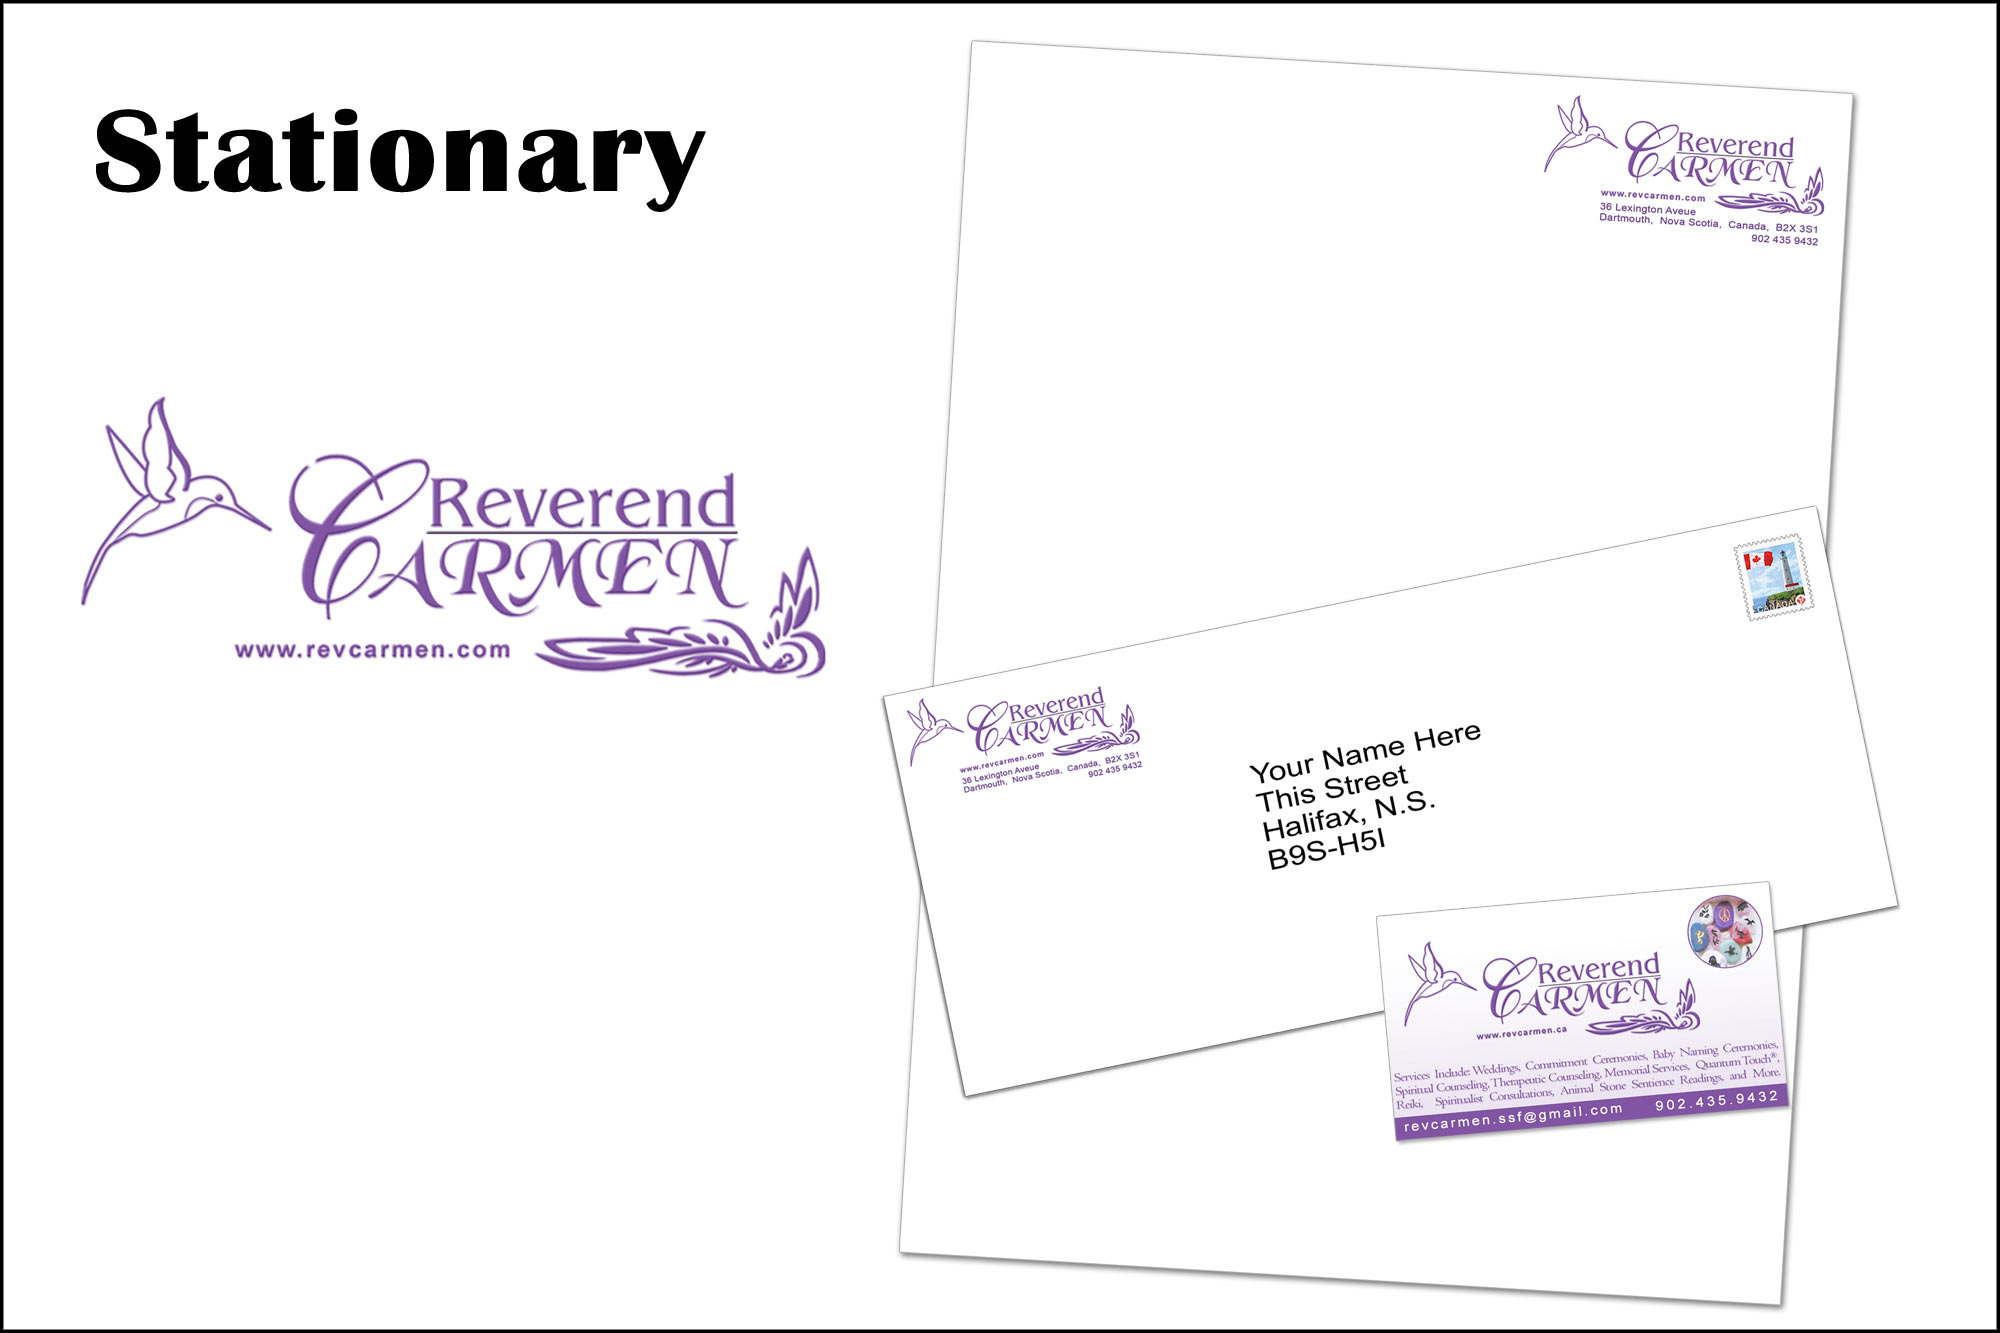 image of a business card design done in purple with a humming bird